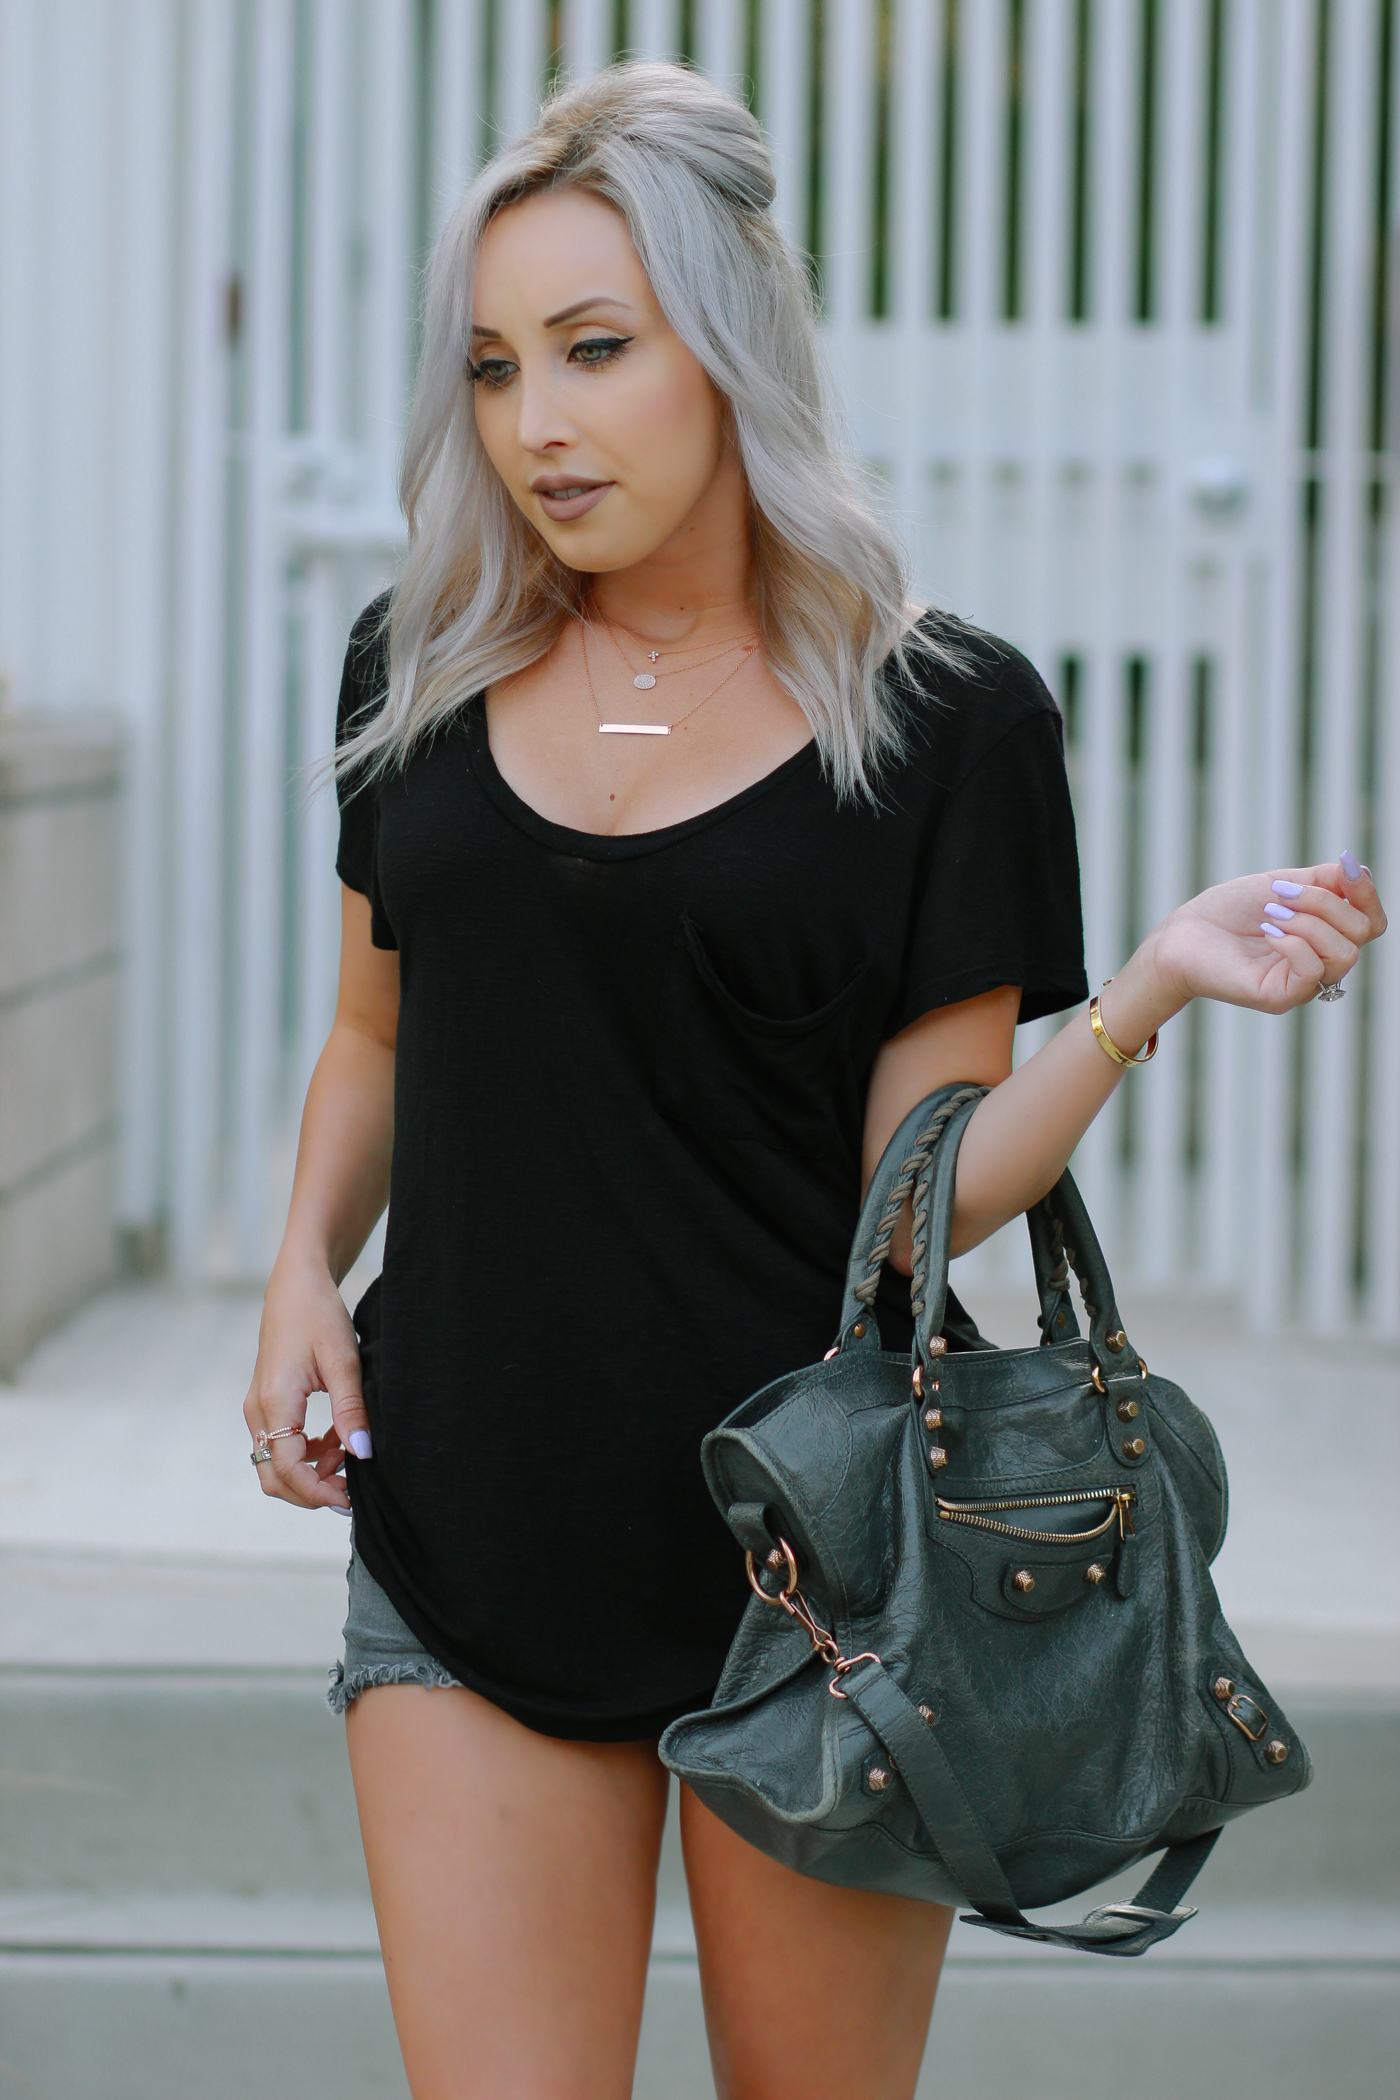 Blondie in the City | Street Style | Grey Balenciaga Bag | Avoce Lace Up Flats